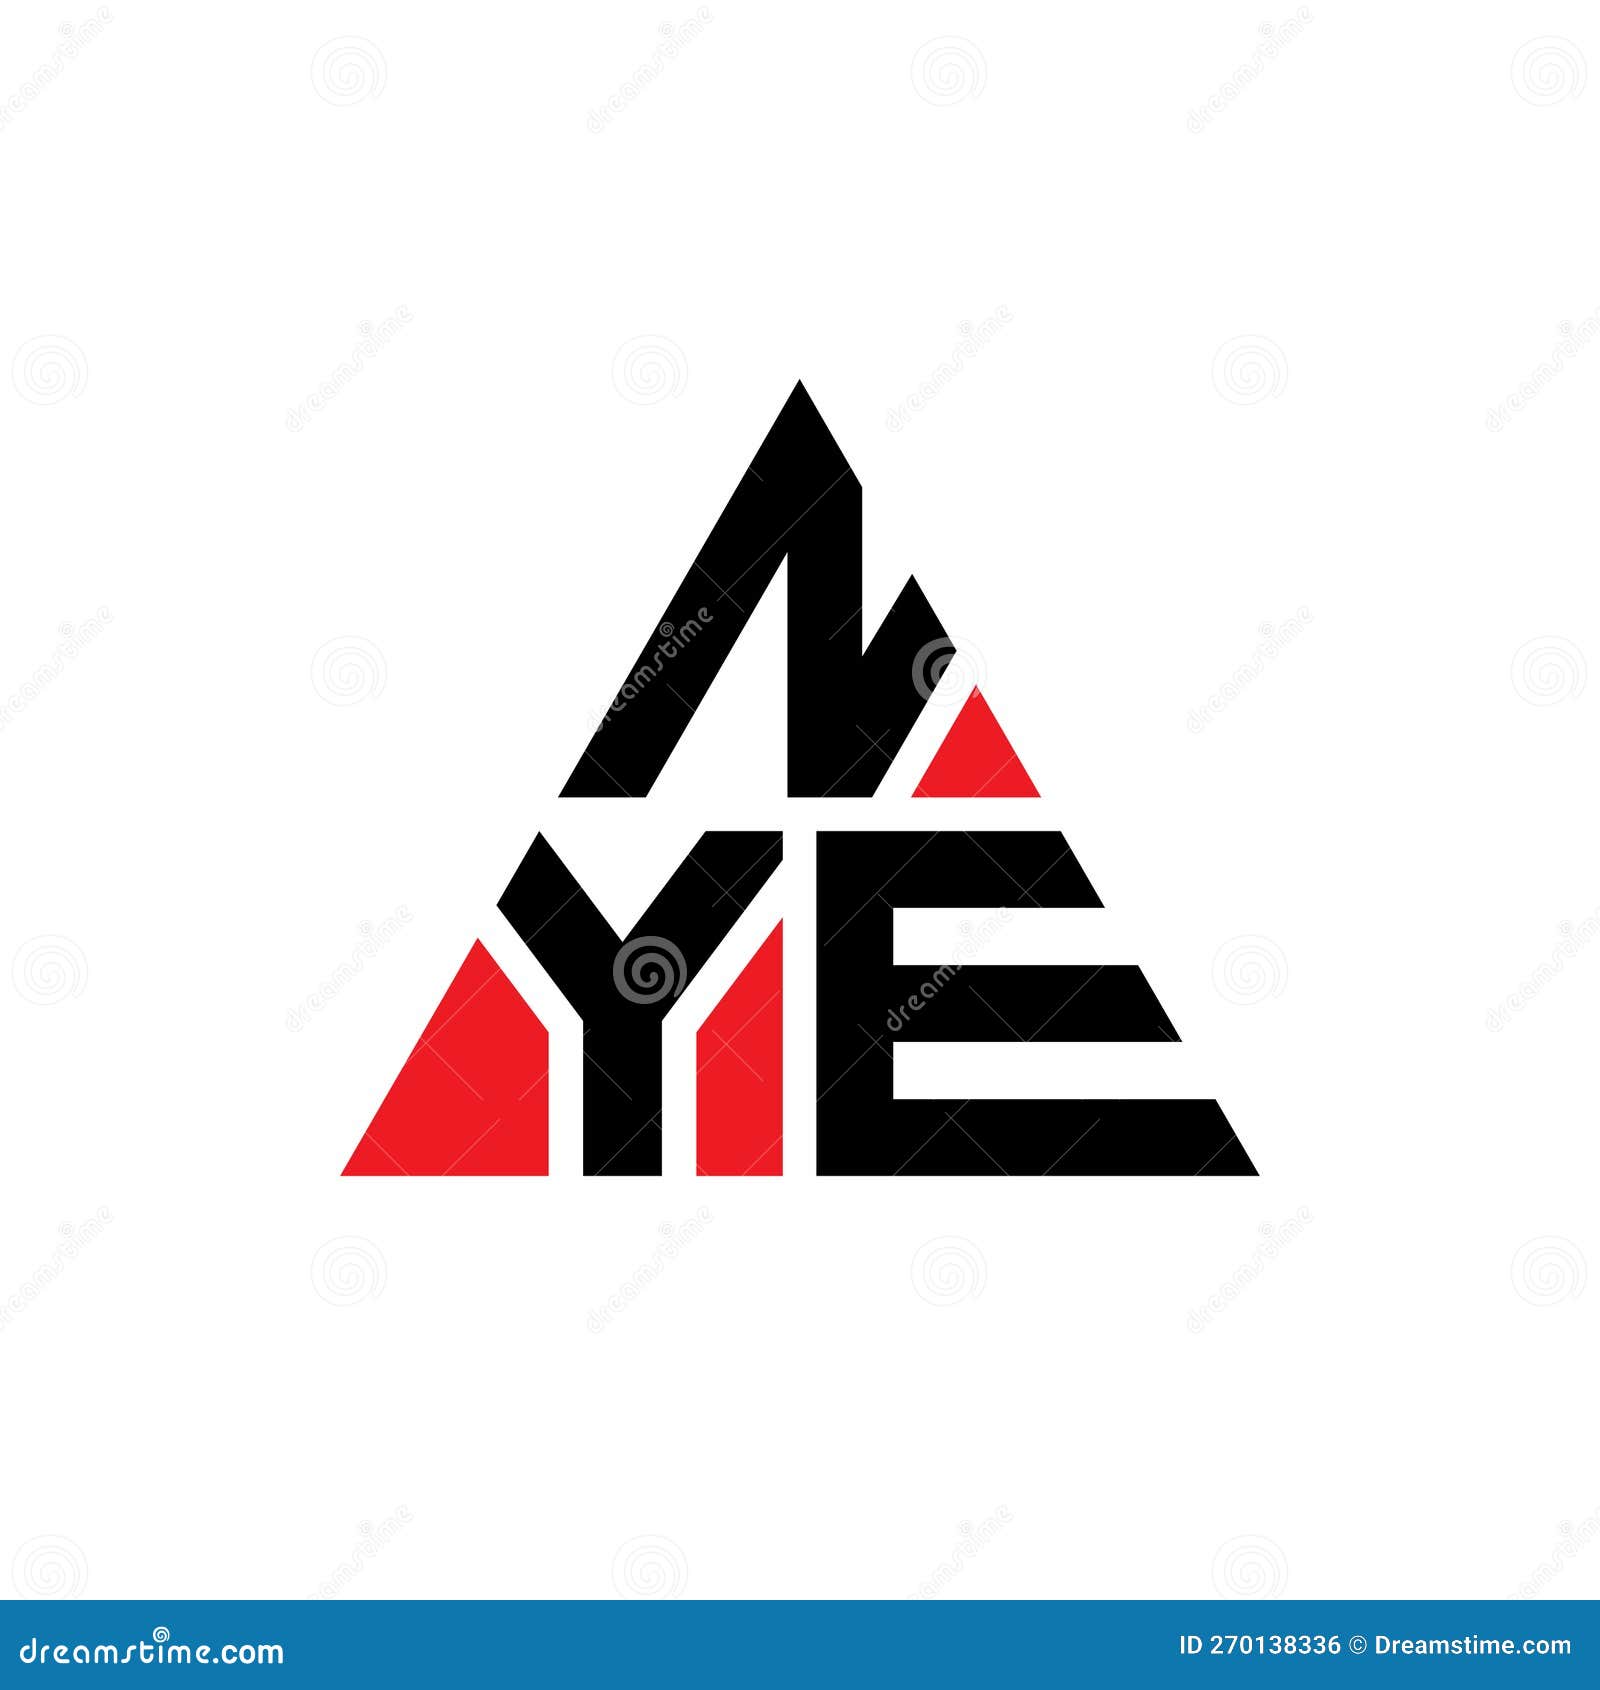 nye triangle letter logo  with triangle . nye triangle logo  monogram. nye triangle  logo template with red